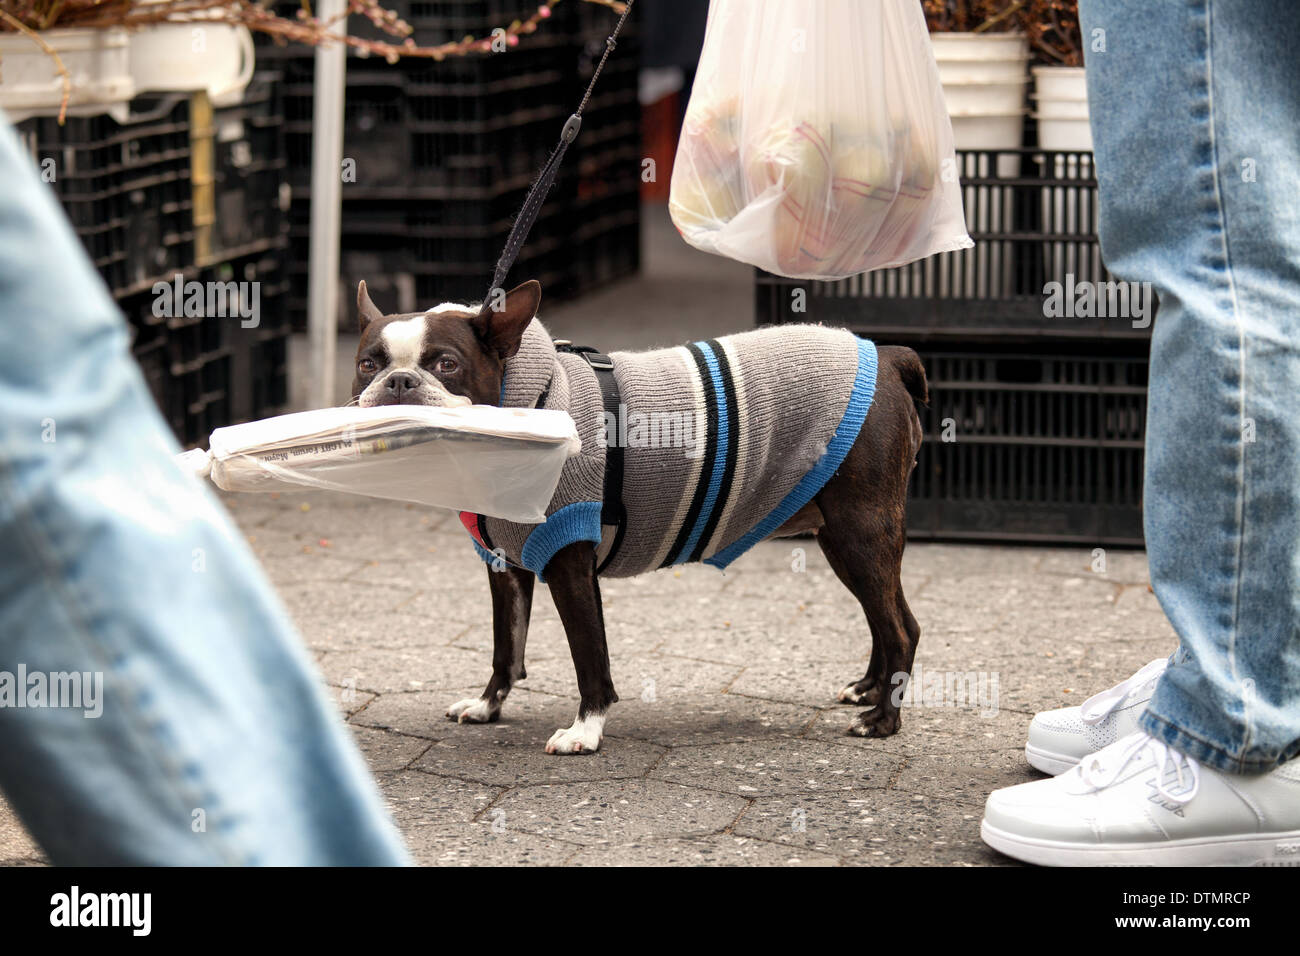 Boston Terrier on a walk with a sweater carrying a newspaper. Stock Photo